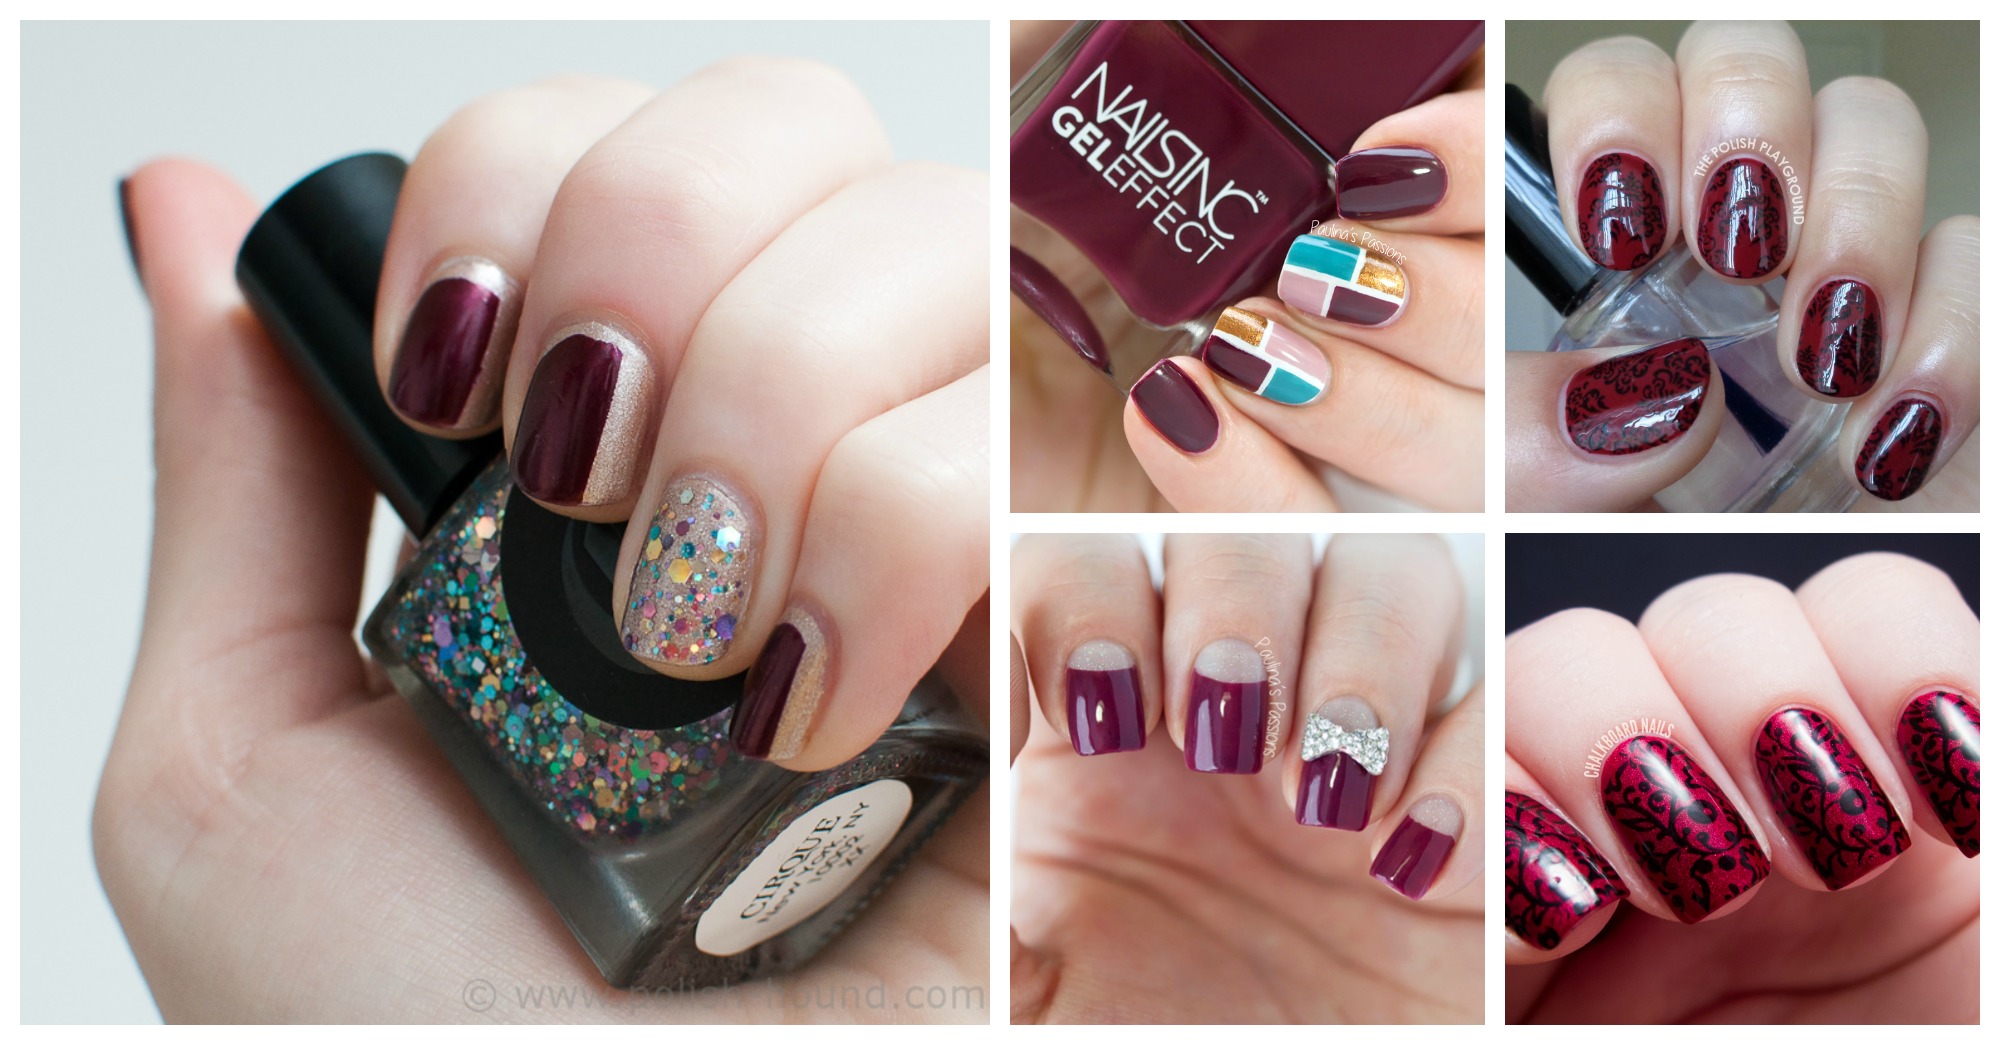 8. Burgundy SNS Nail Designs for Weddings - wide 7